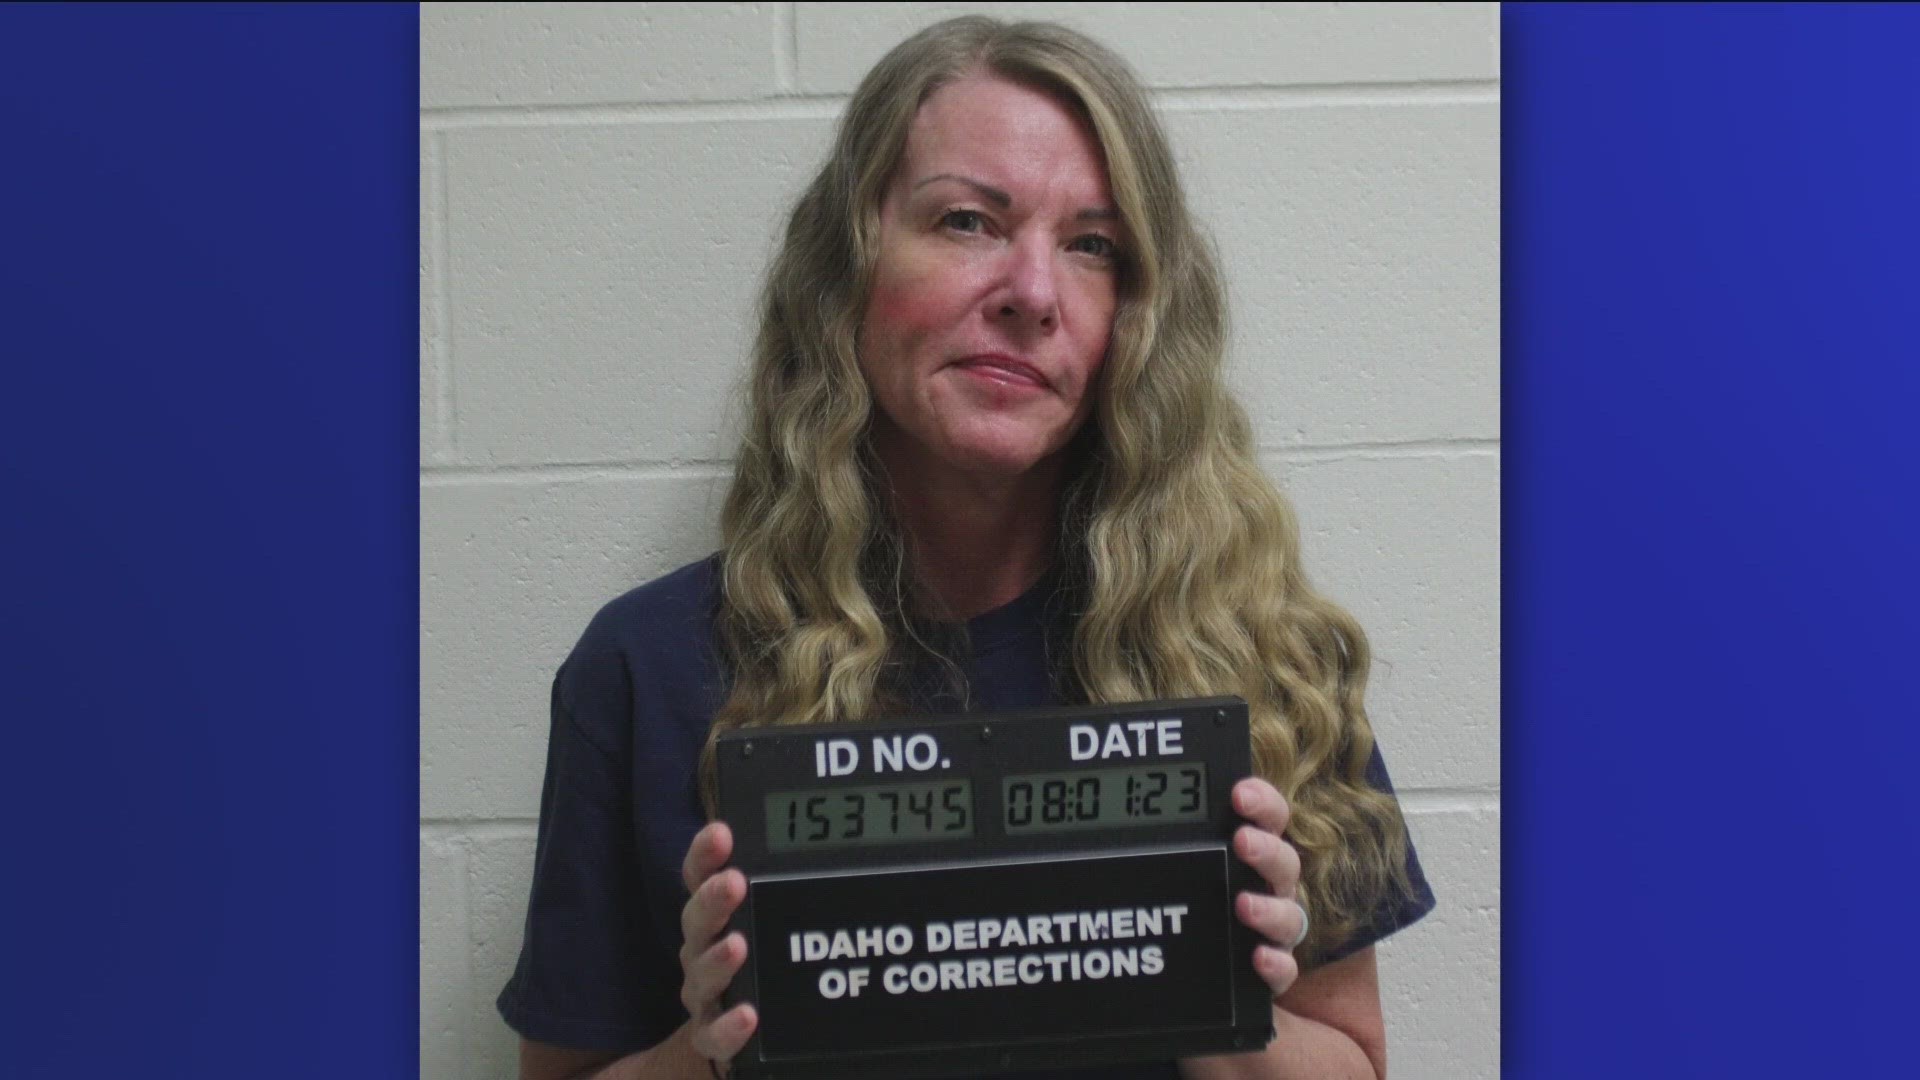 Vallow is facing two more conspiracy charges in Arizona in the death of her former husband Charles Vallow and a shooting at another relative who survived.